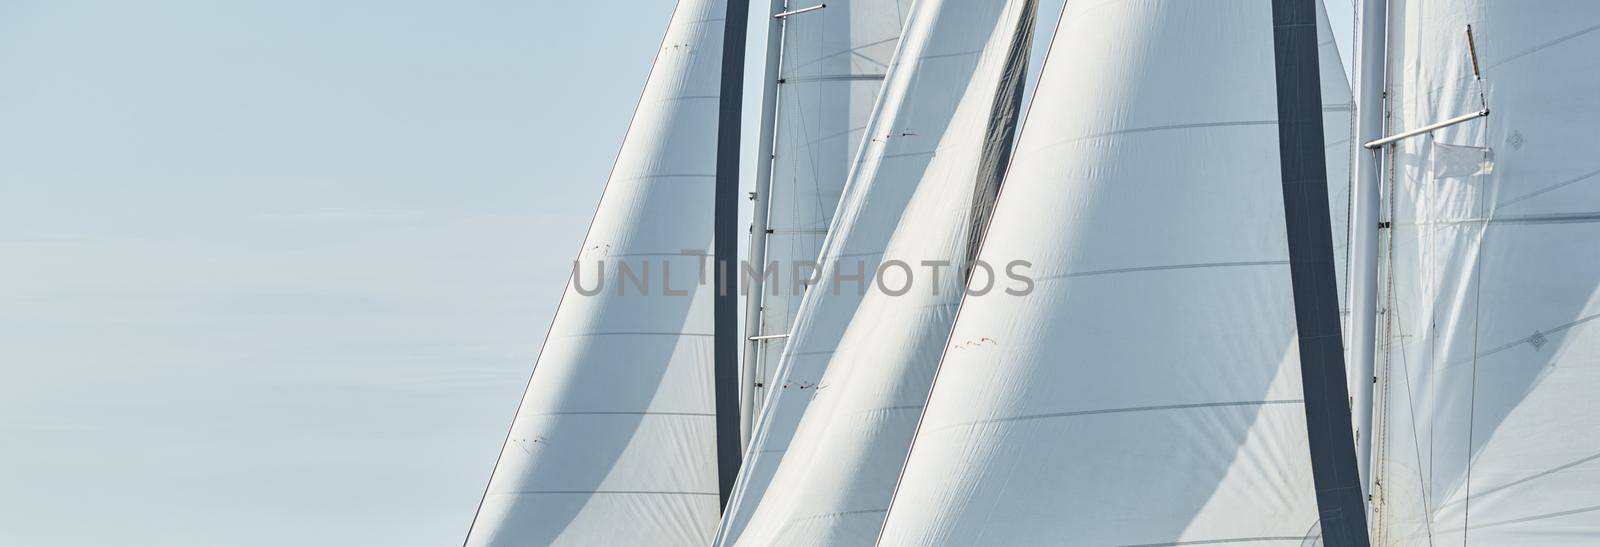 Some sails of white color, sailboats compete in a sailing regatta at sunset, sailing race by vladimirdrozdin